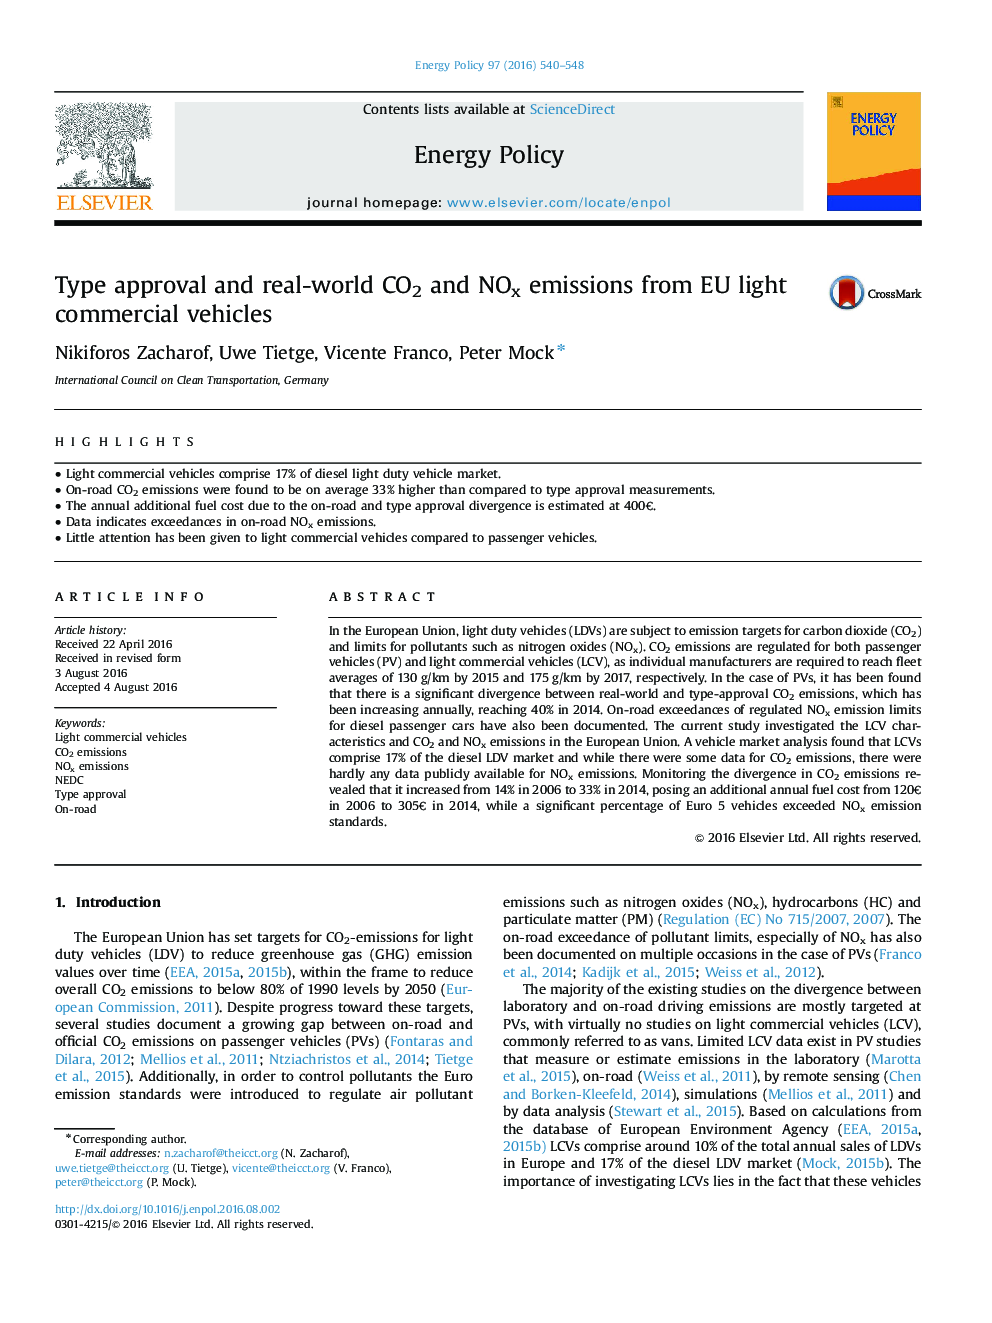 Type approval and real-world CO2 and NOx emissions from EU light commercial vehicles